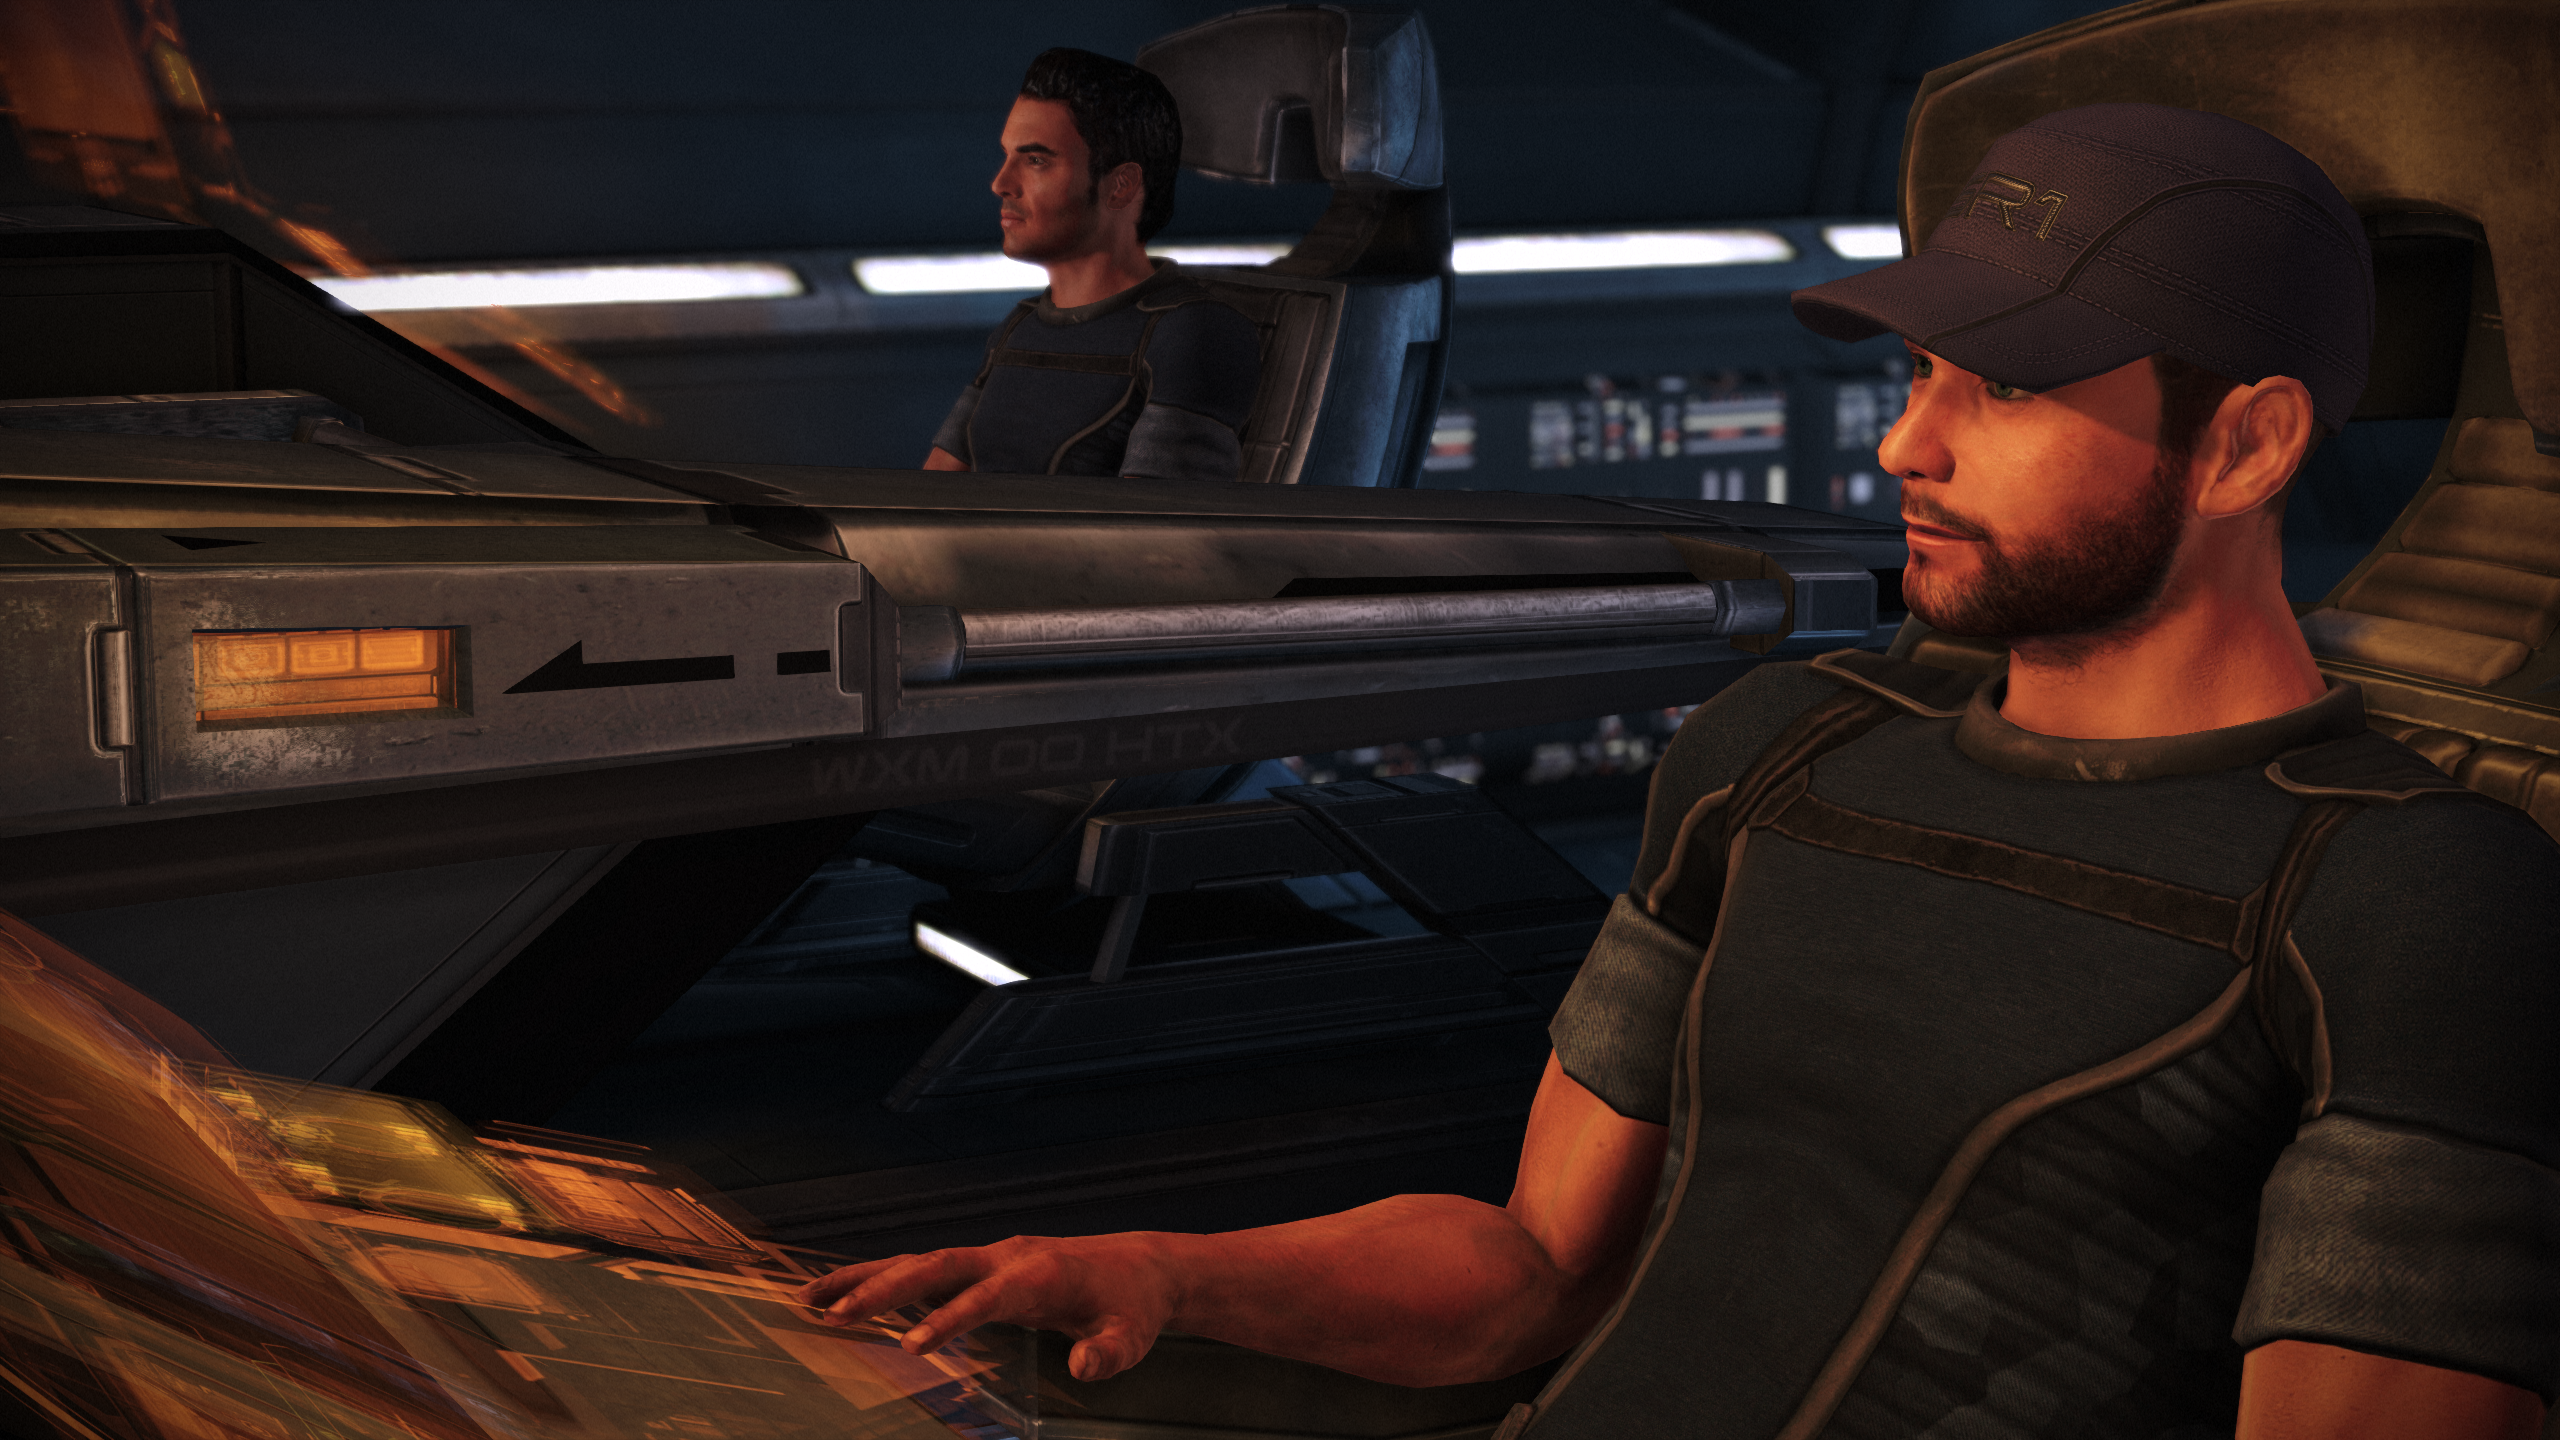 A man sitting at a sci-fi spaceship console with a hand casually placed on the touch controls. It's Joker, Mass Effect's snarky pilot.